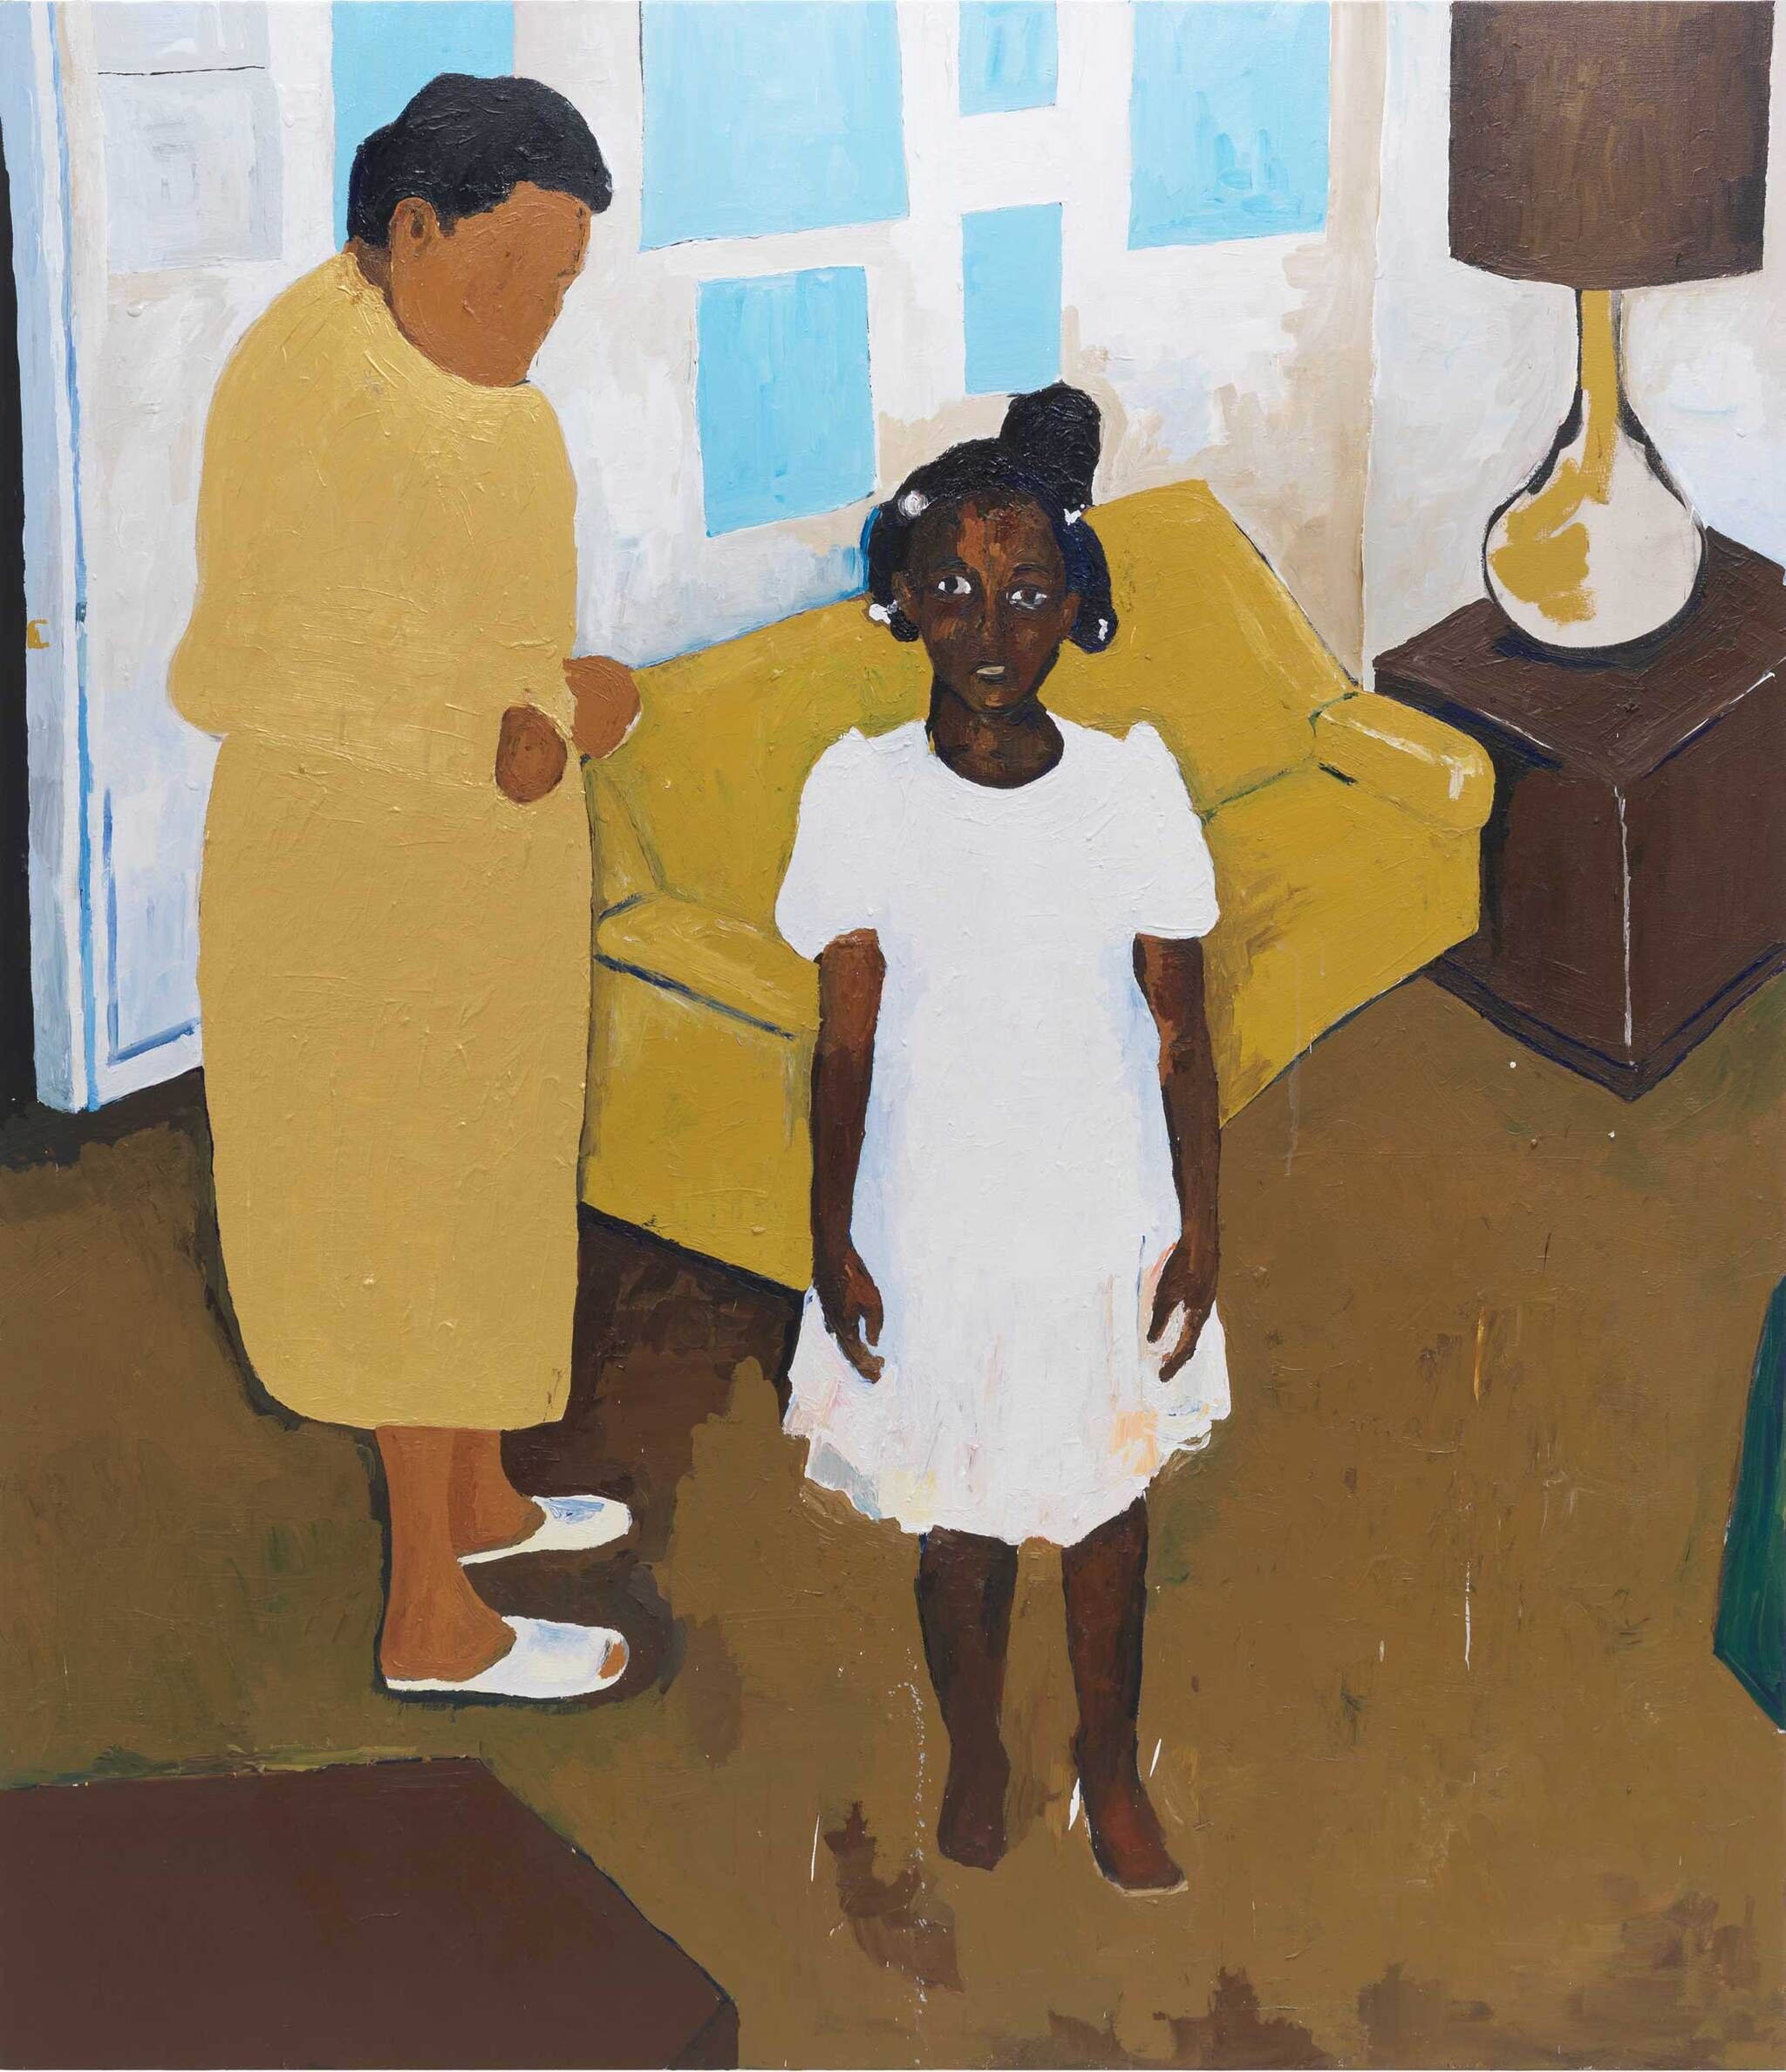 Two figures standing in a living room. The younger figure wears a pristine white dress and matching white clips in their hair. An older figure stands to the left, with their head tilted downwards, seemingly inspecting the younger figure’s outfit. They are dressed in a long sleeve shift dress which has a muted yellowish-green color.